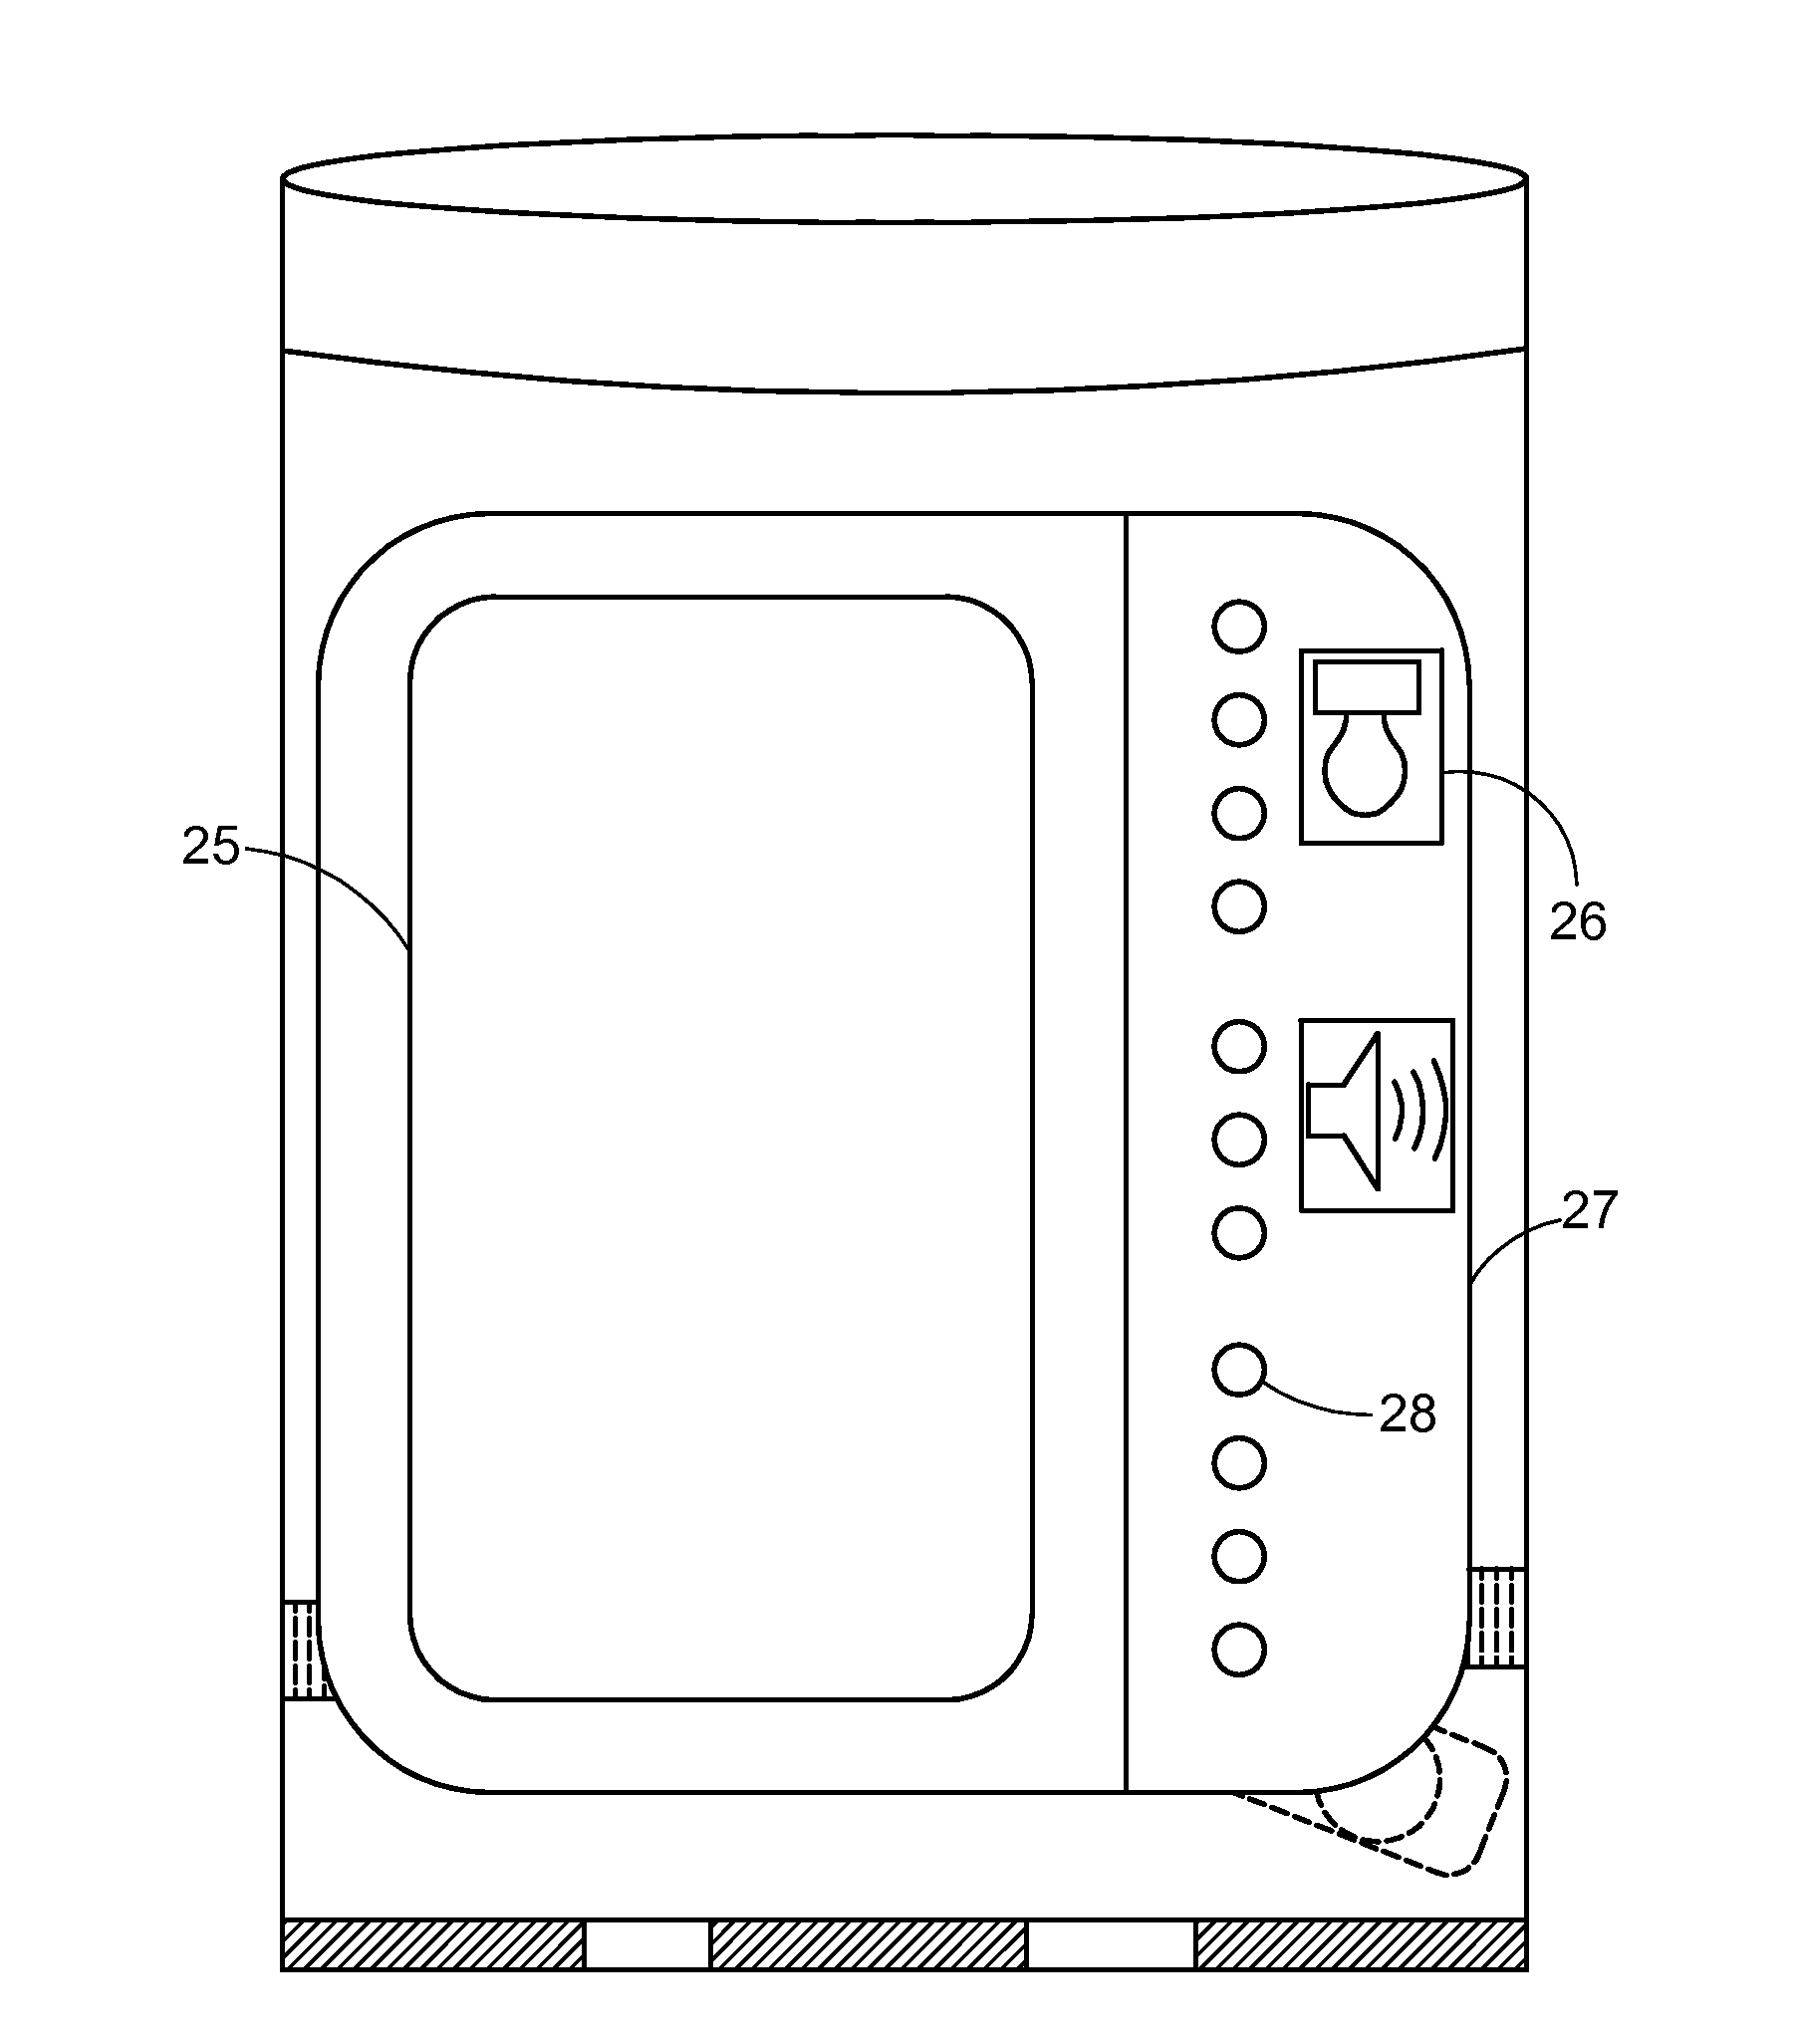 System and apparatus for displaying drug interactions on drug storage containers